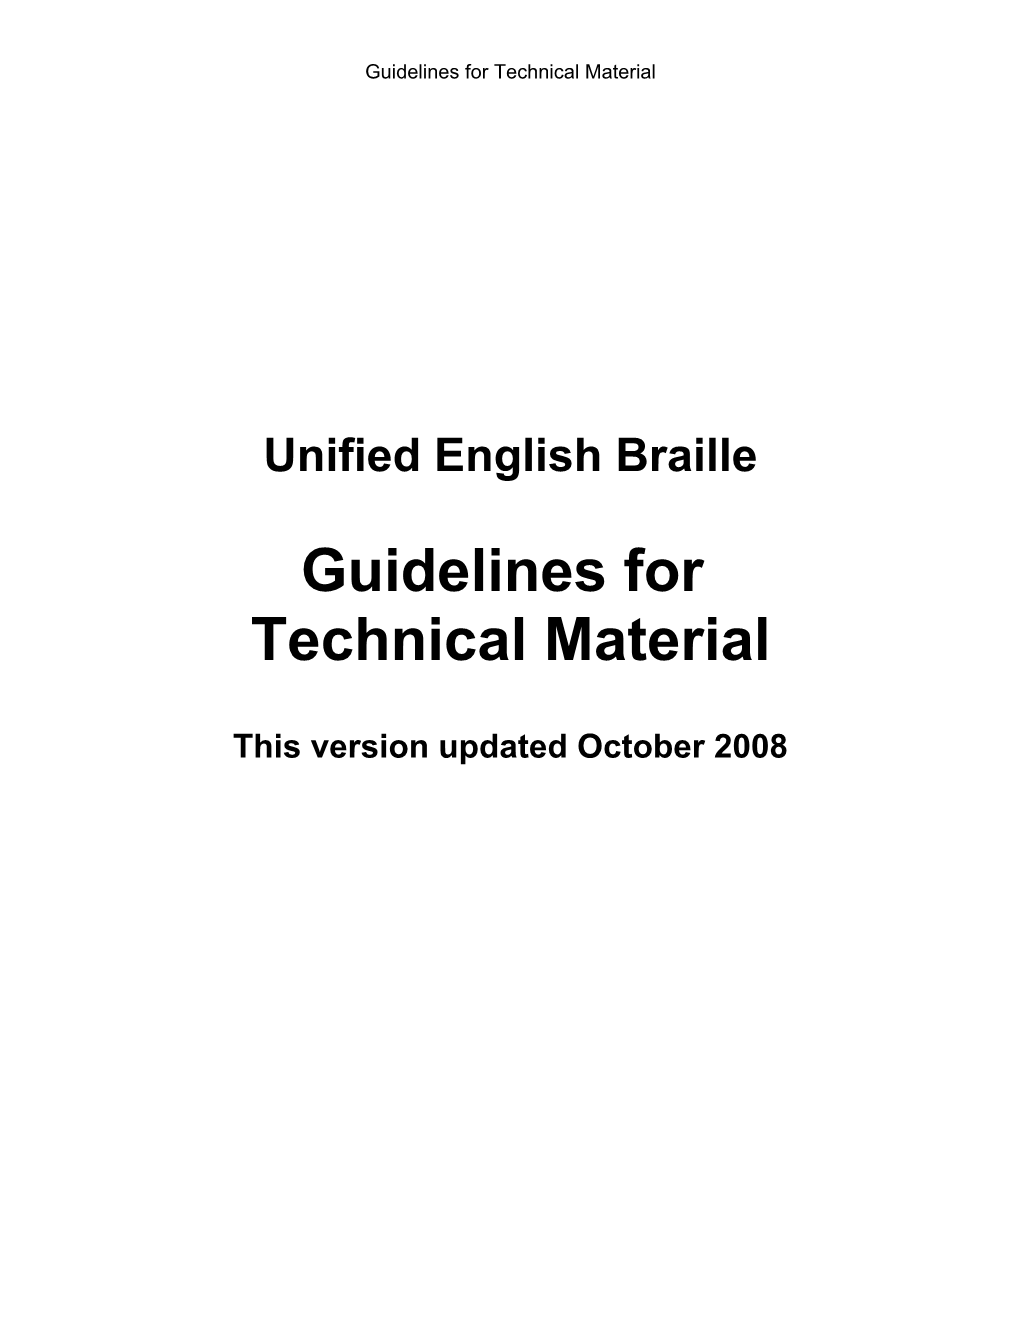 Unified English Braille